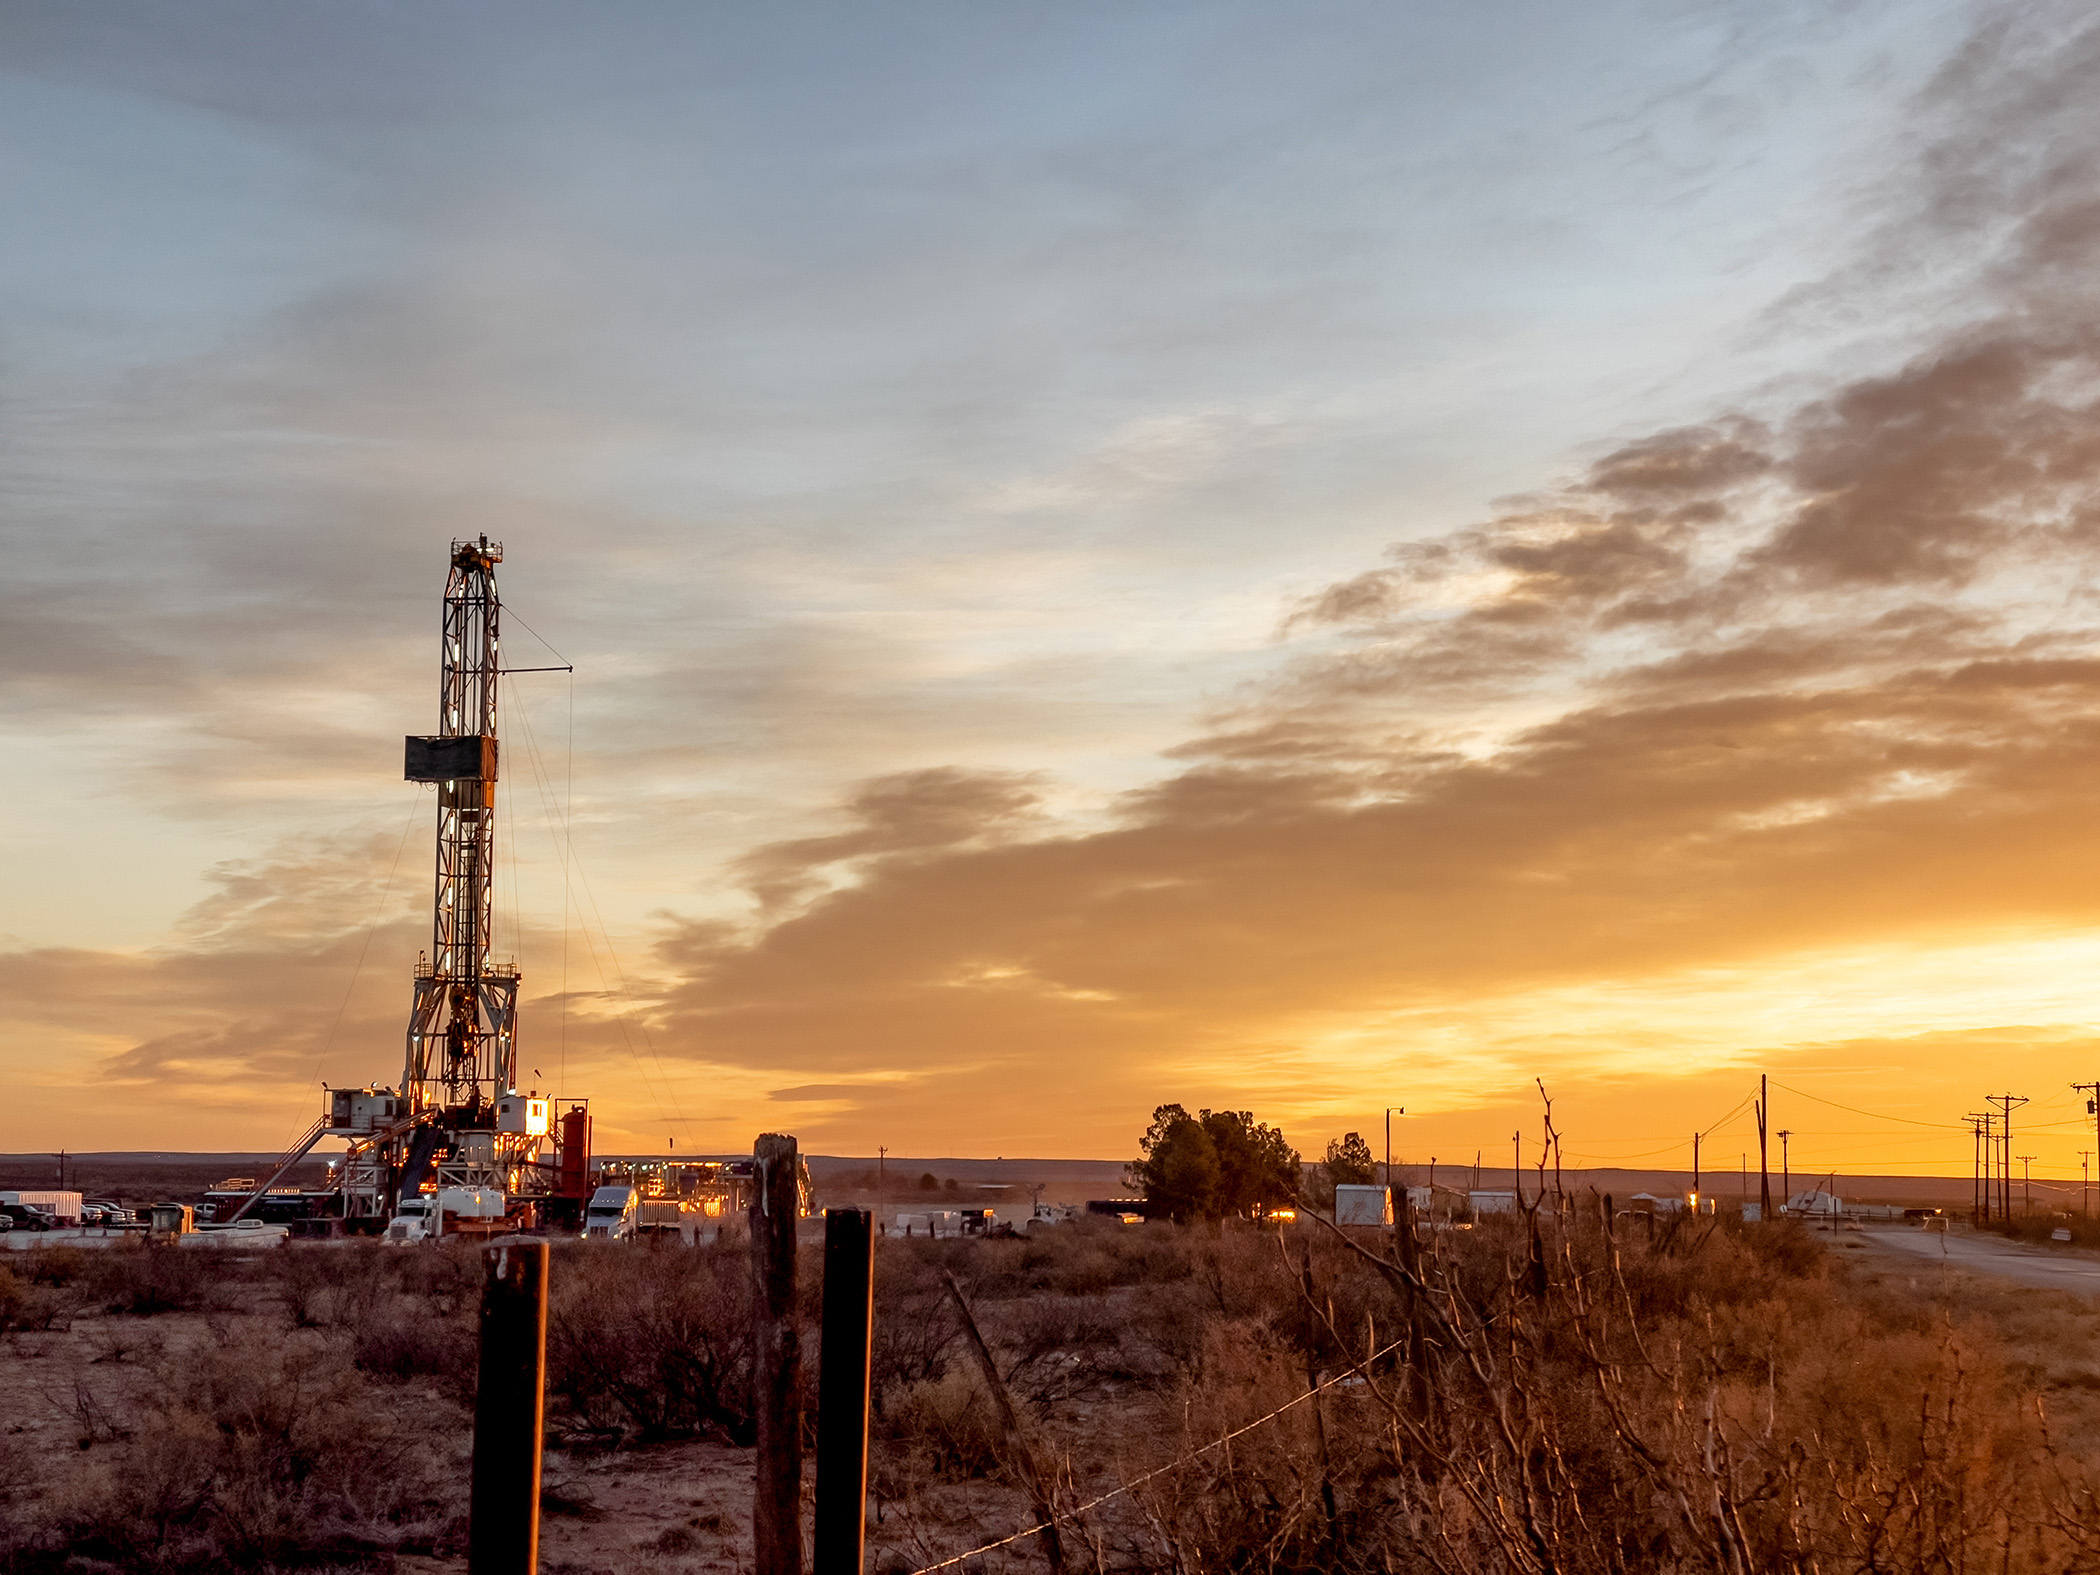 Drone view of an oil or gas drill fracking rig pad in New Mexico with the sunset in the background